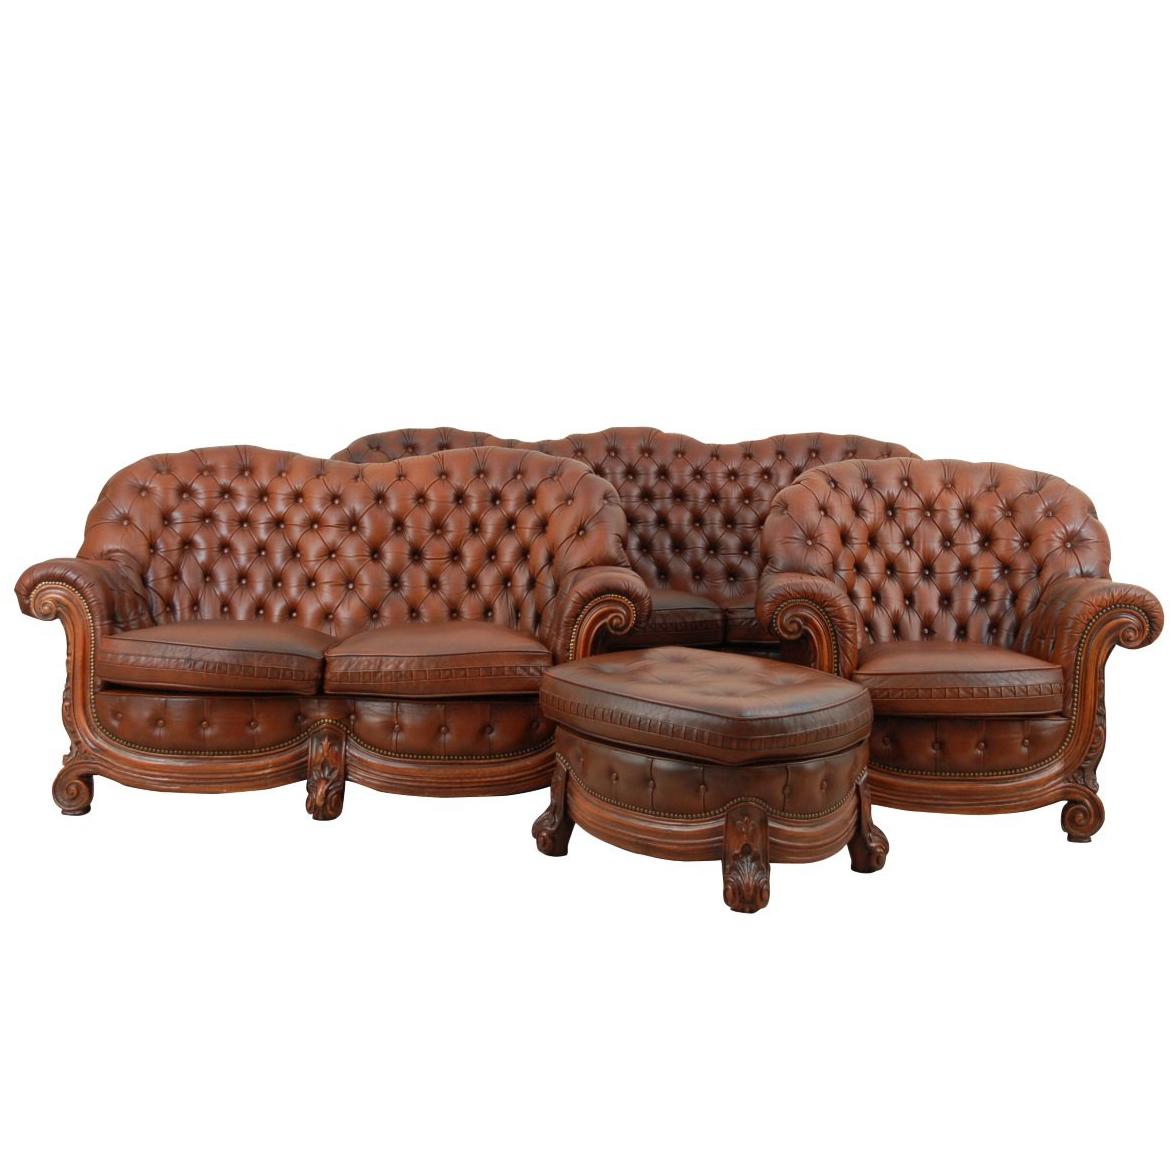 Baroque 20th Century Chesterfield Settee Special Rare to Find 3 + 2 + 1 +Ottoman For Sale